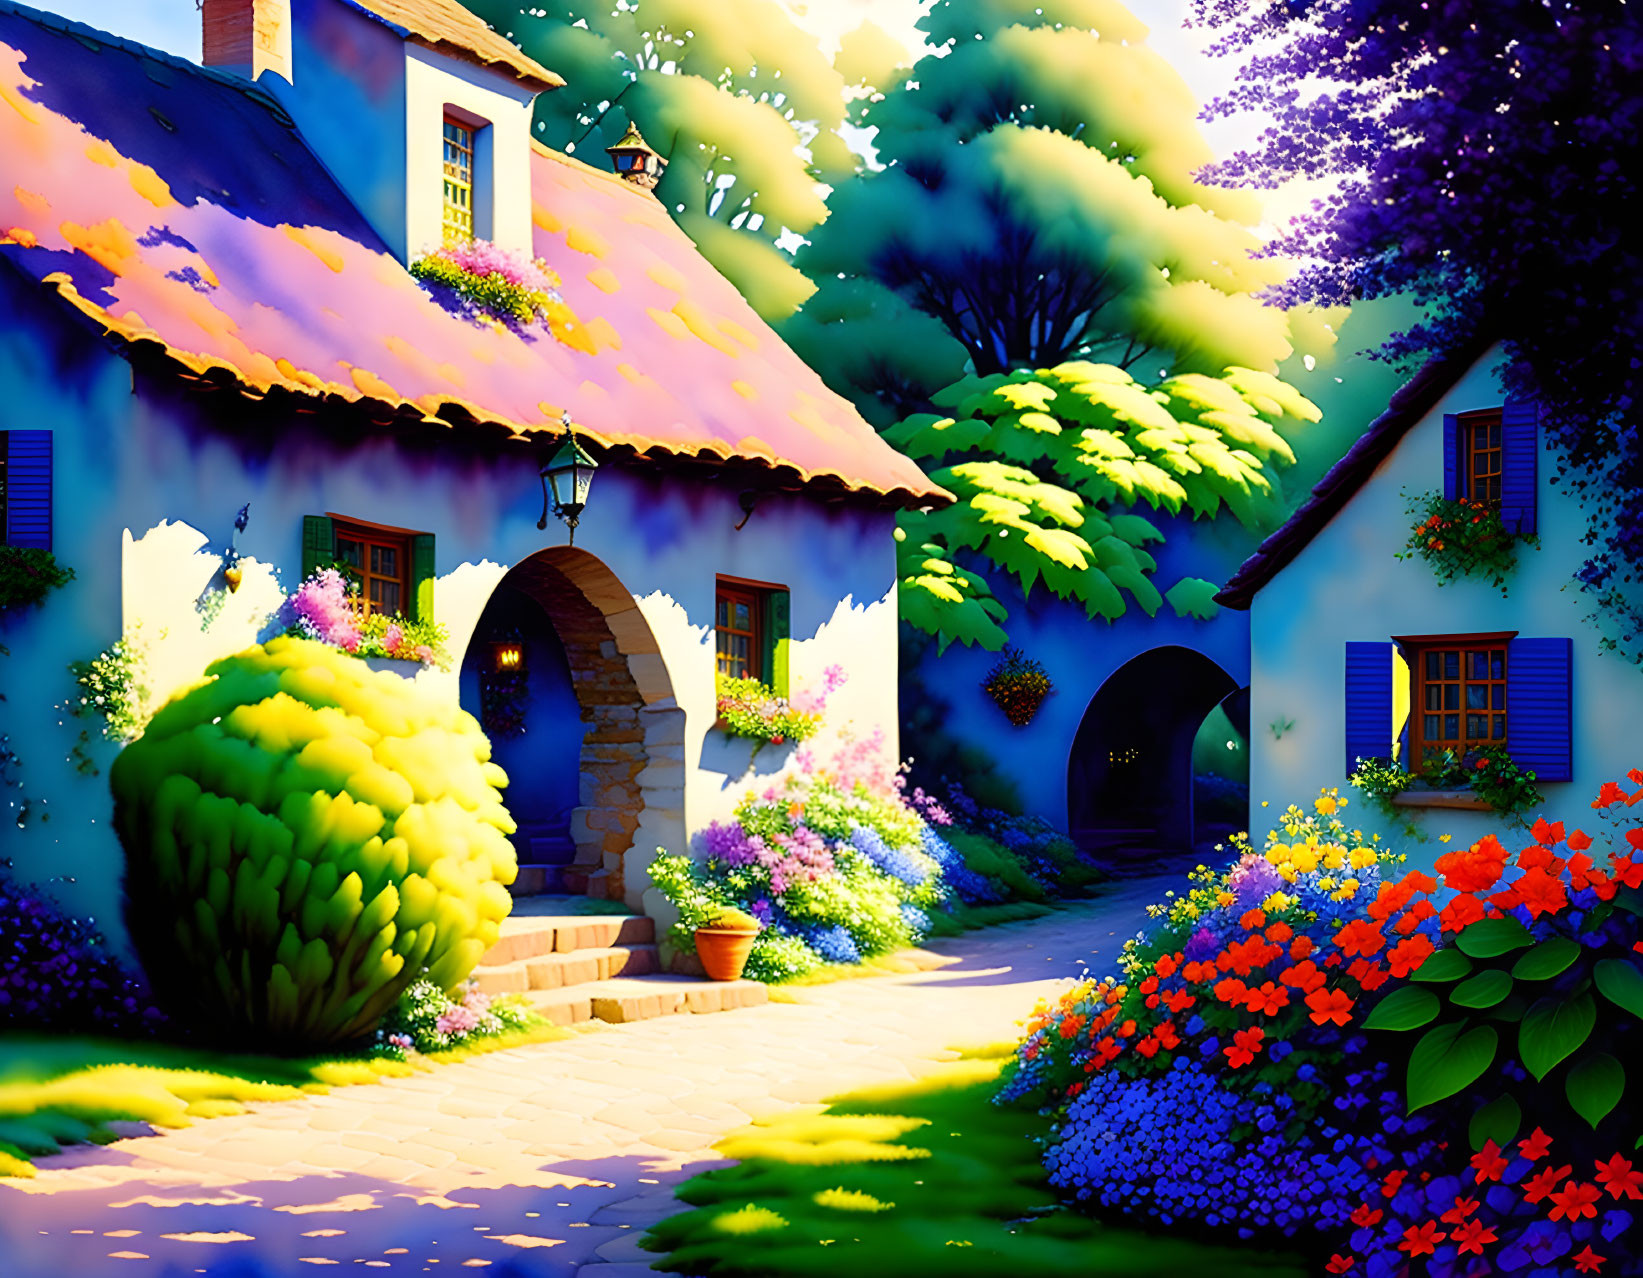 Cottage of Flowers